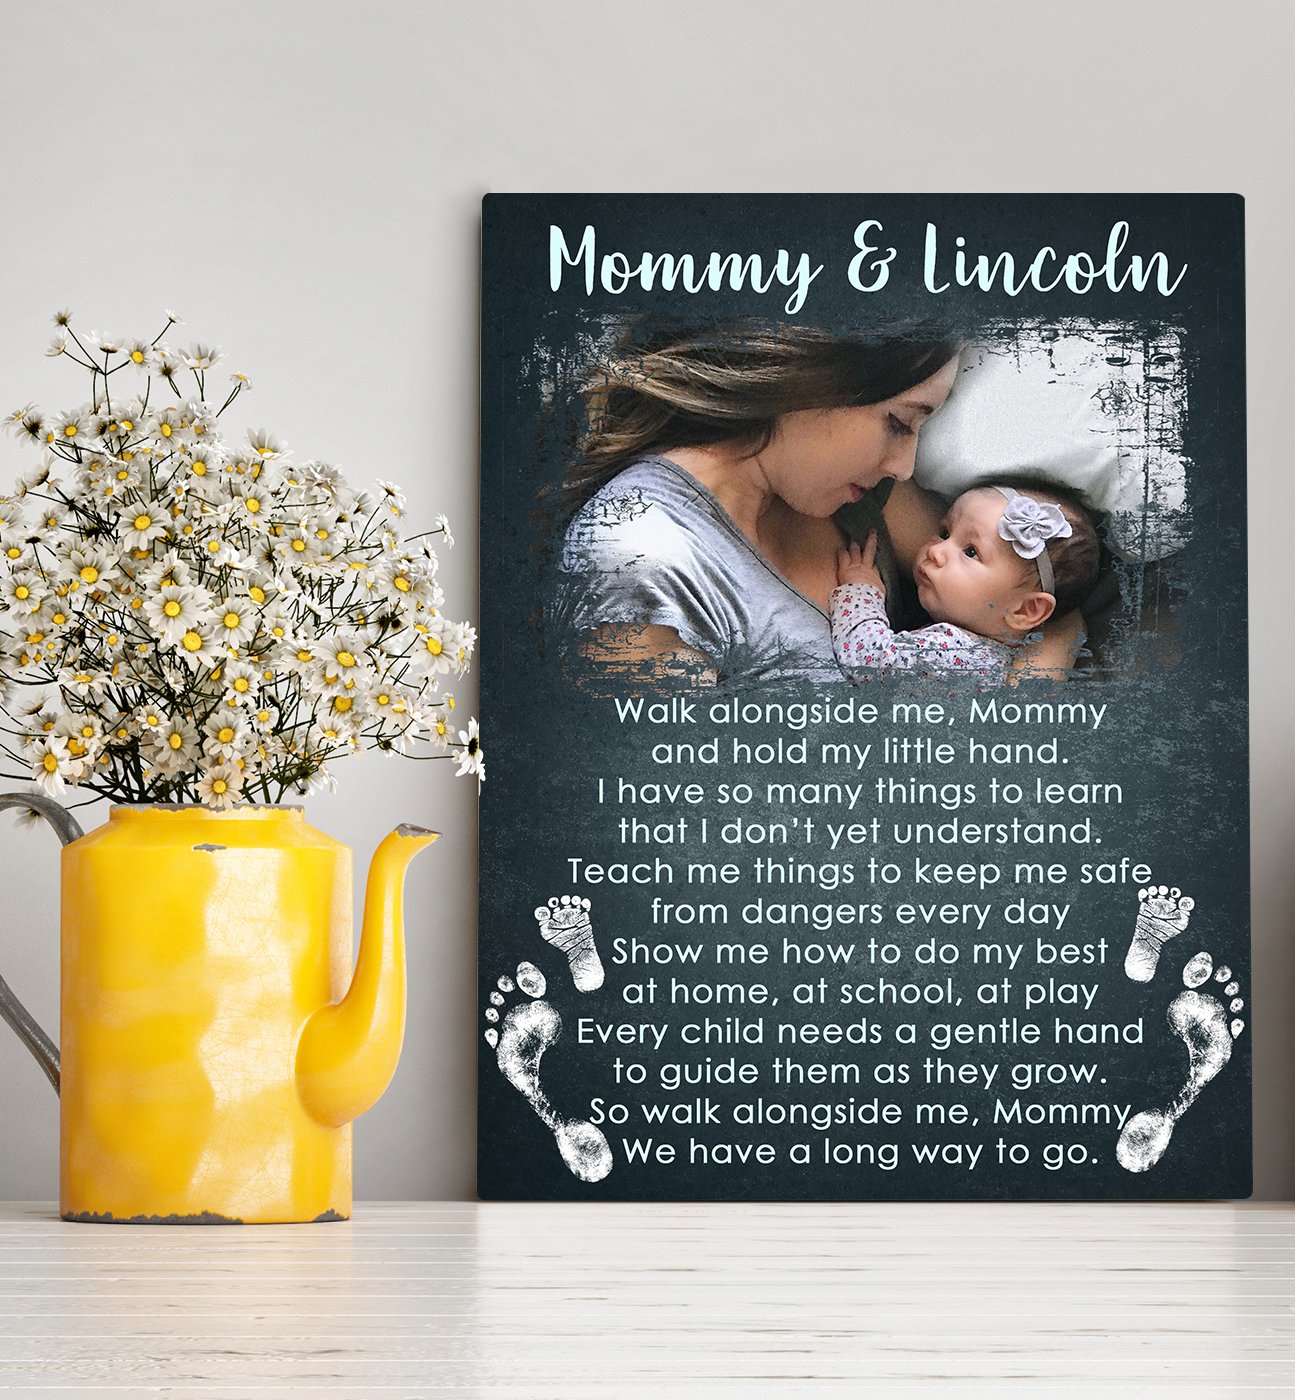 Custom personalized photo to canvas prints wall art Mother's day gifts idea, pictures on canvas Christmas, birthday presents for daughter & son - Mommy Walk Alongside Me